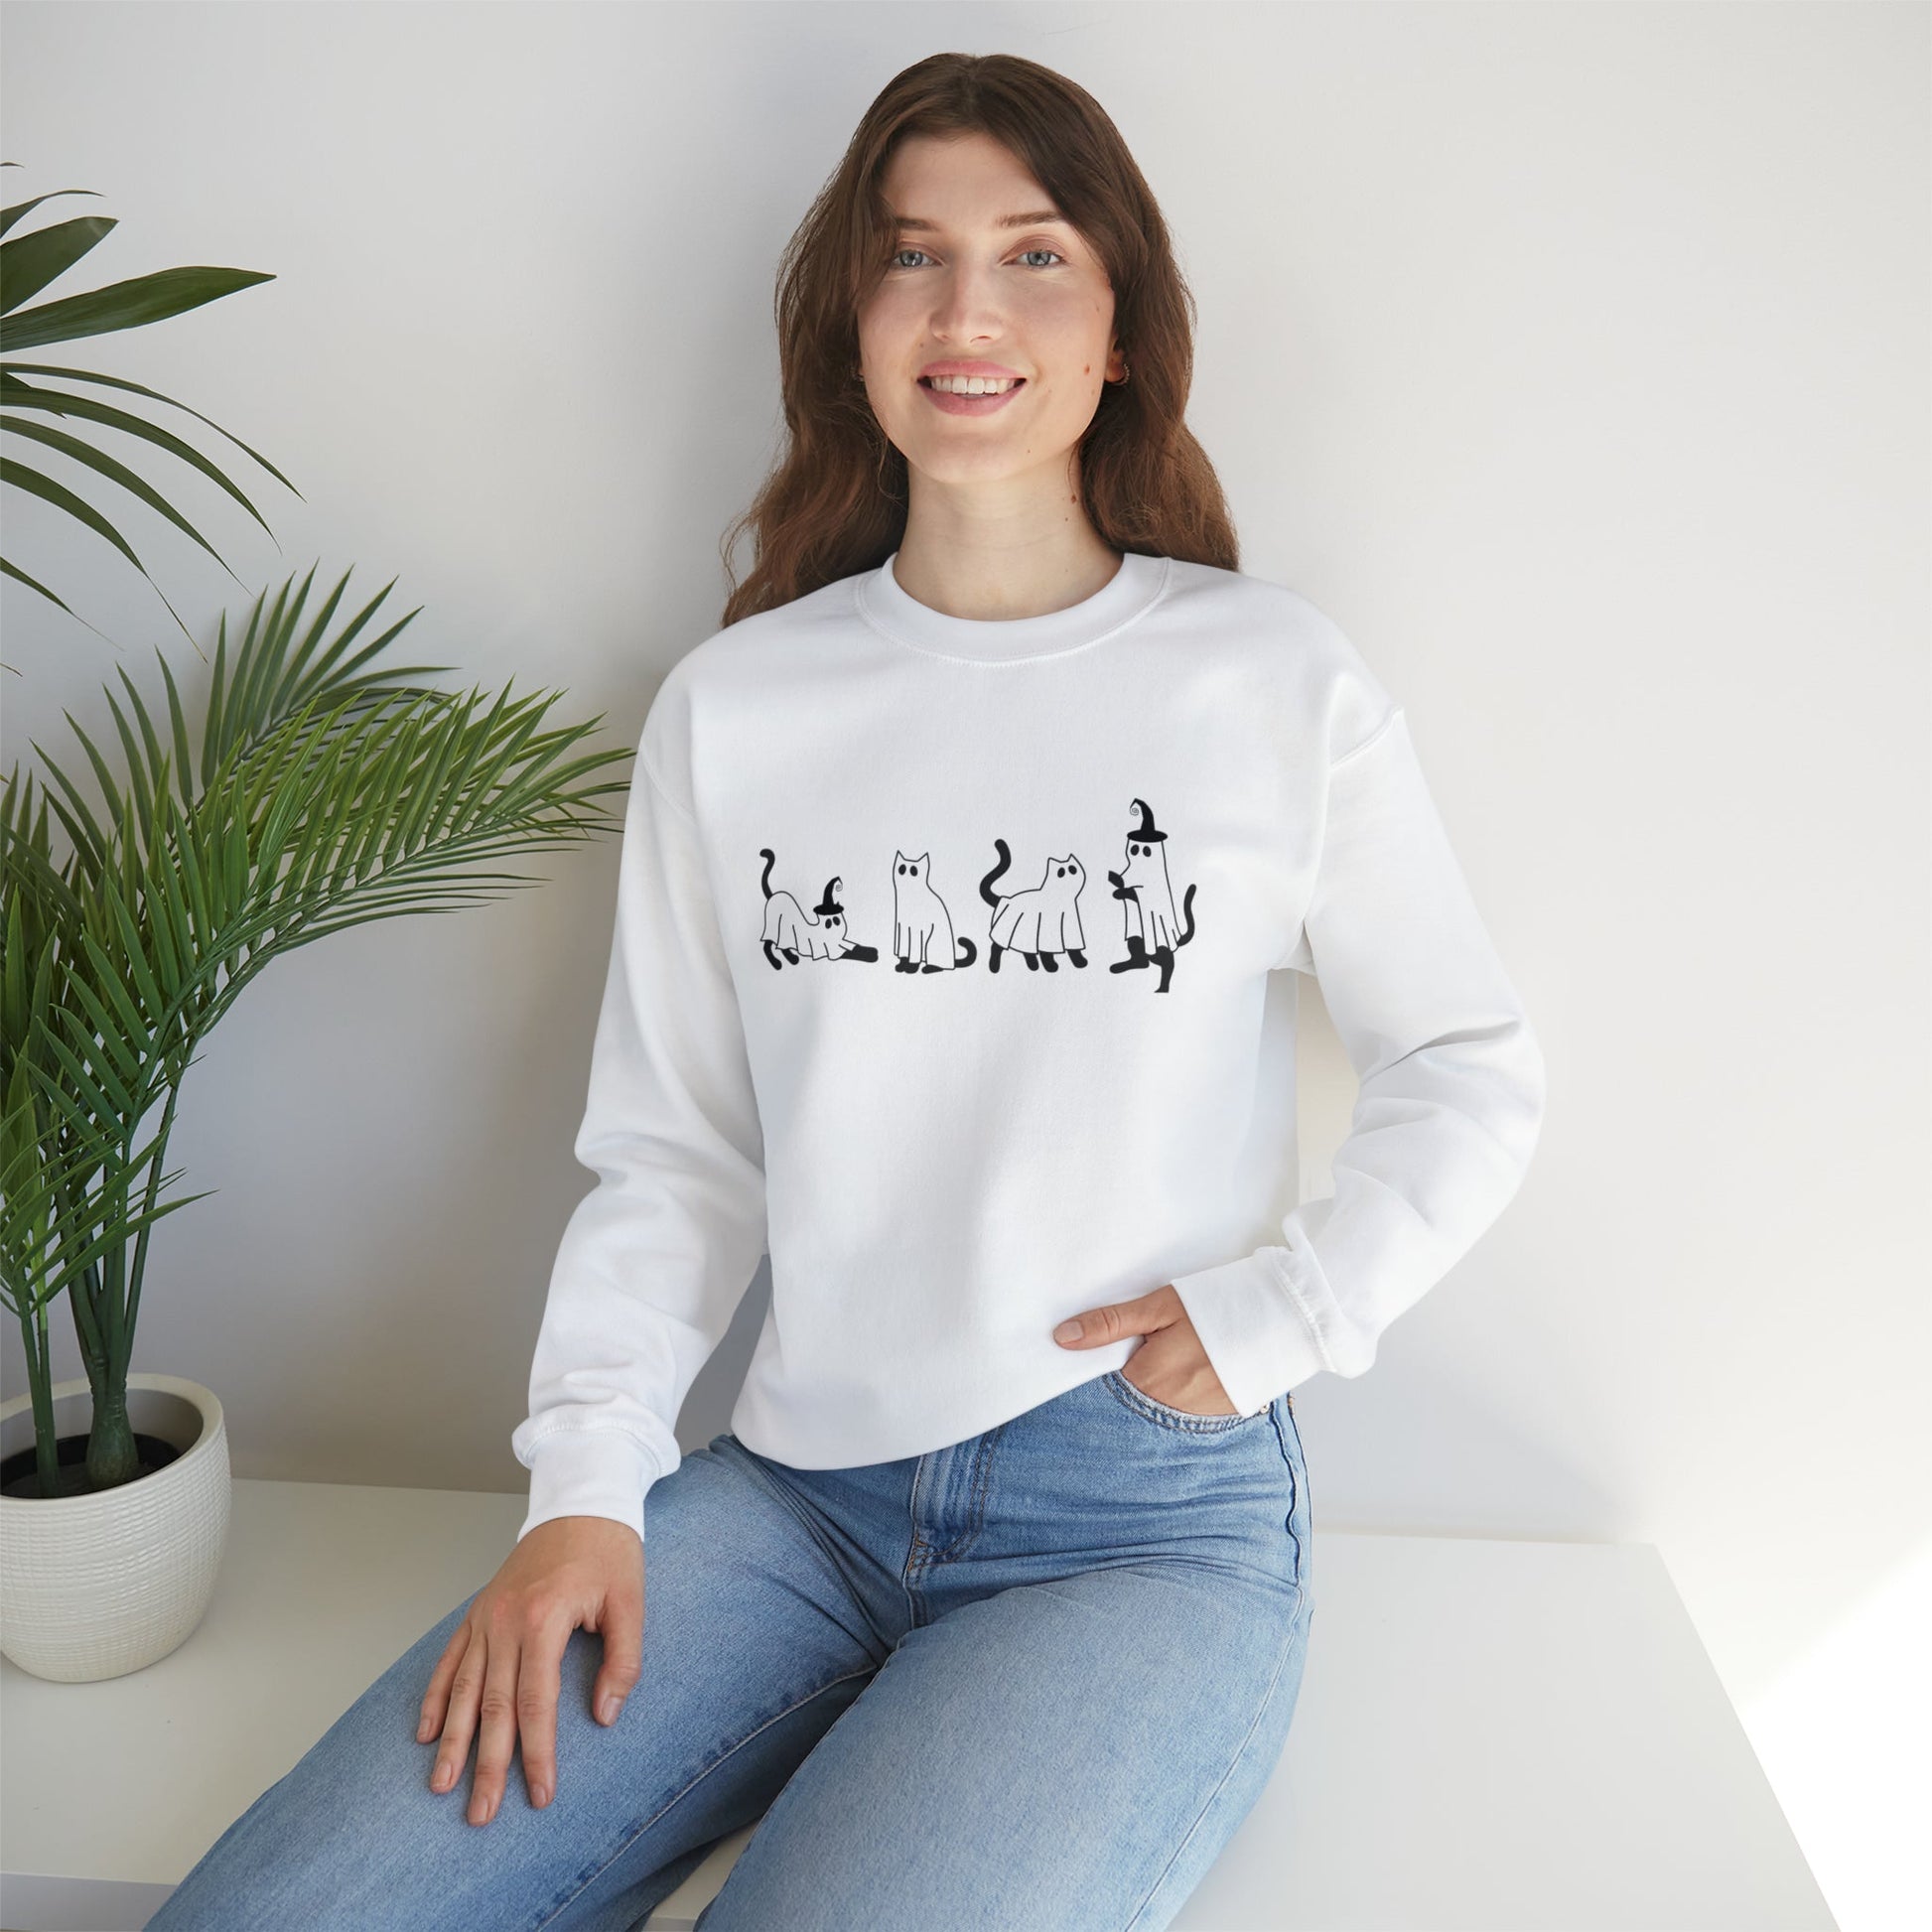 Get trendy with Cat Ghosts ™ Crewneck Sweatshir - Sweatshirt available at Good Gift Company. Grab yours for $32 today!